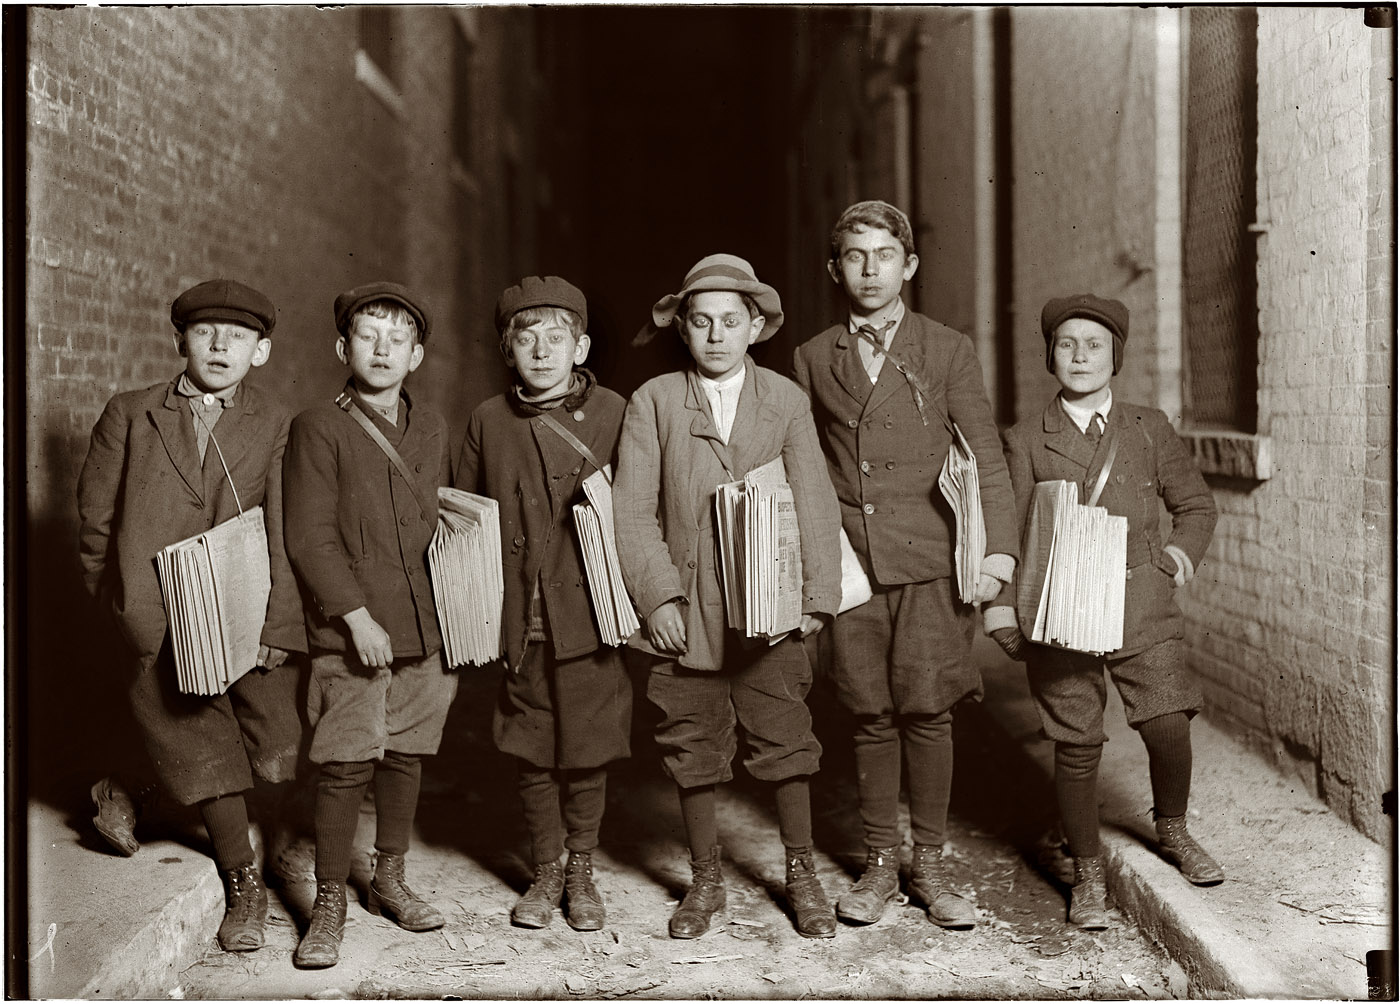 December 17, 1909. "After 9 p.m. Newark, New Jersey. All these were selling and work later some nights. Some are 10 years old." View full size. Photo and caption by Lewis Wickes Hine. So, who here has the latest on Britney?